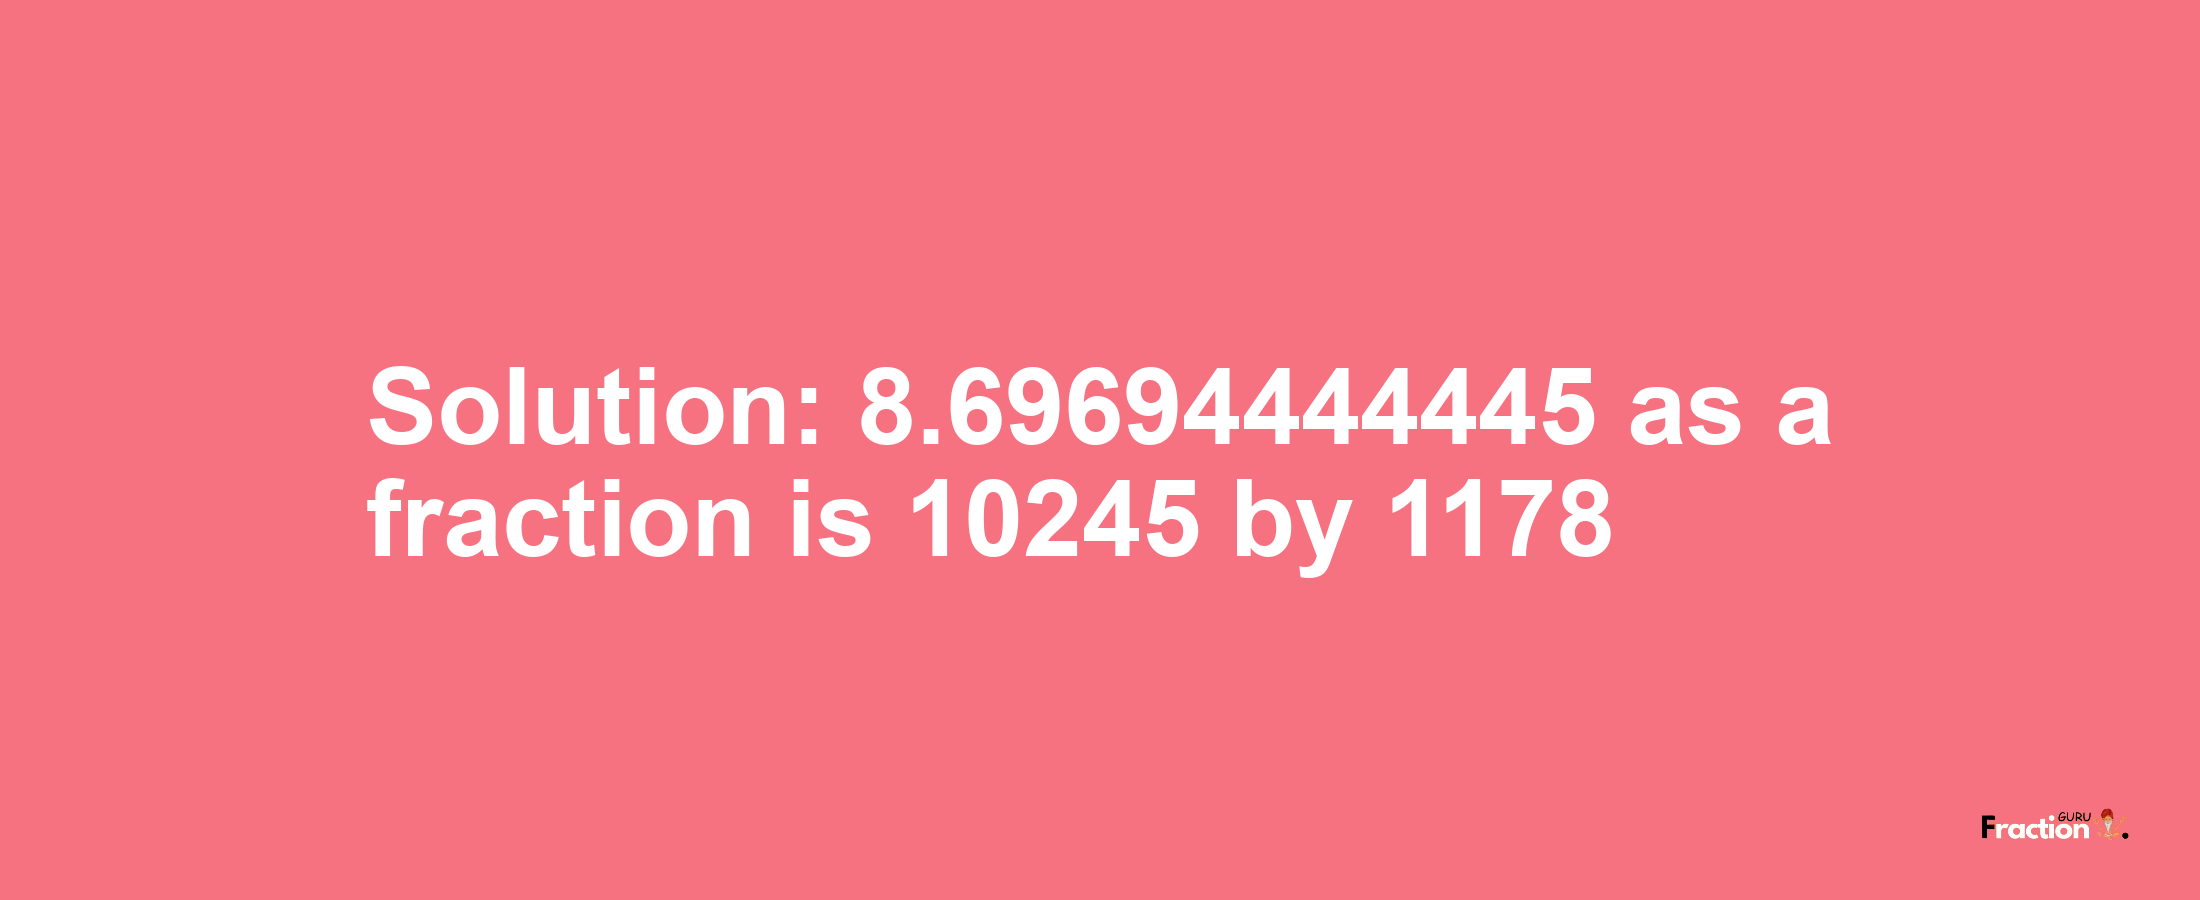 Solution:8.69694444445 as a fraction is 10245/1178